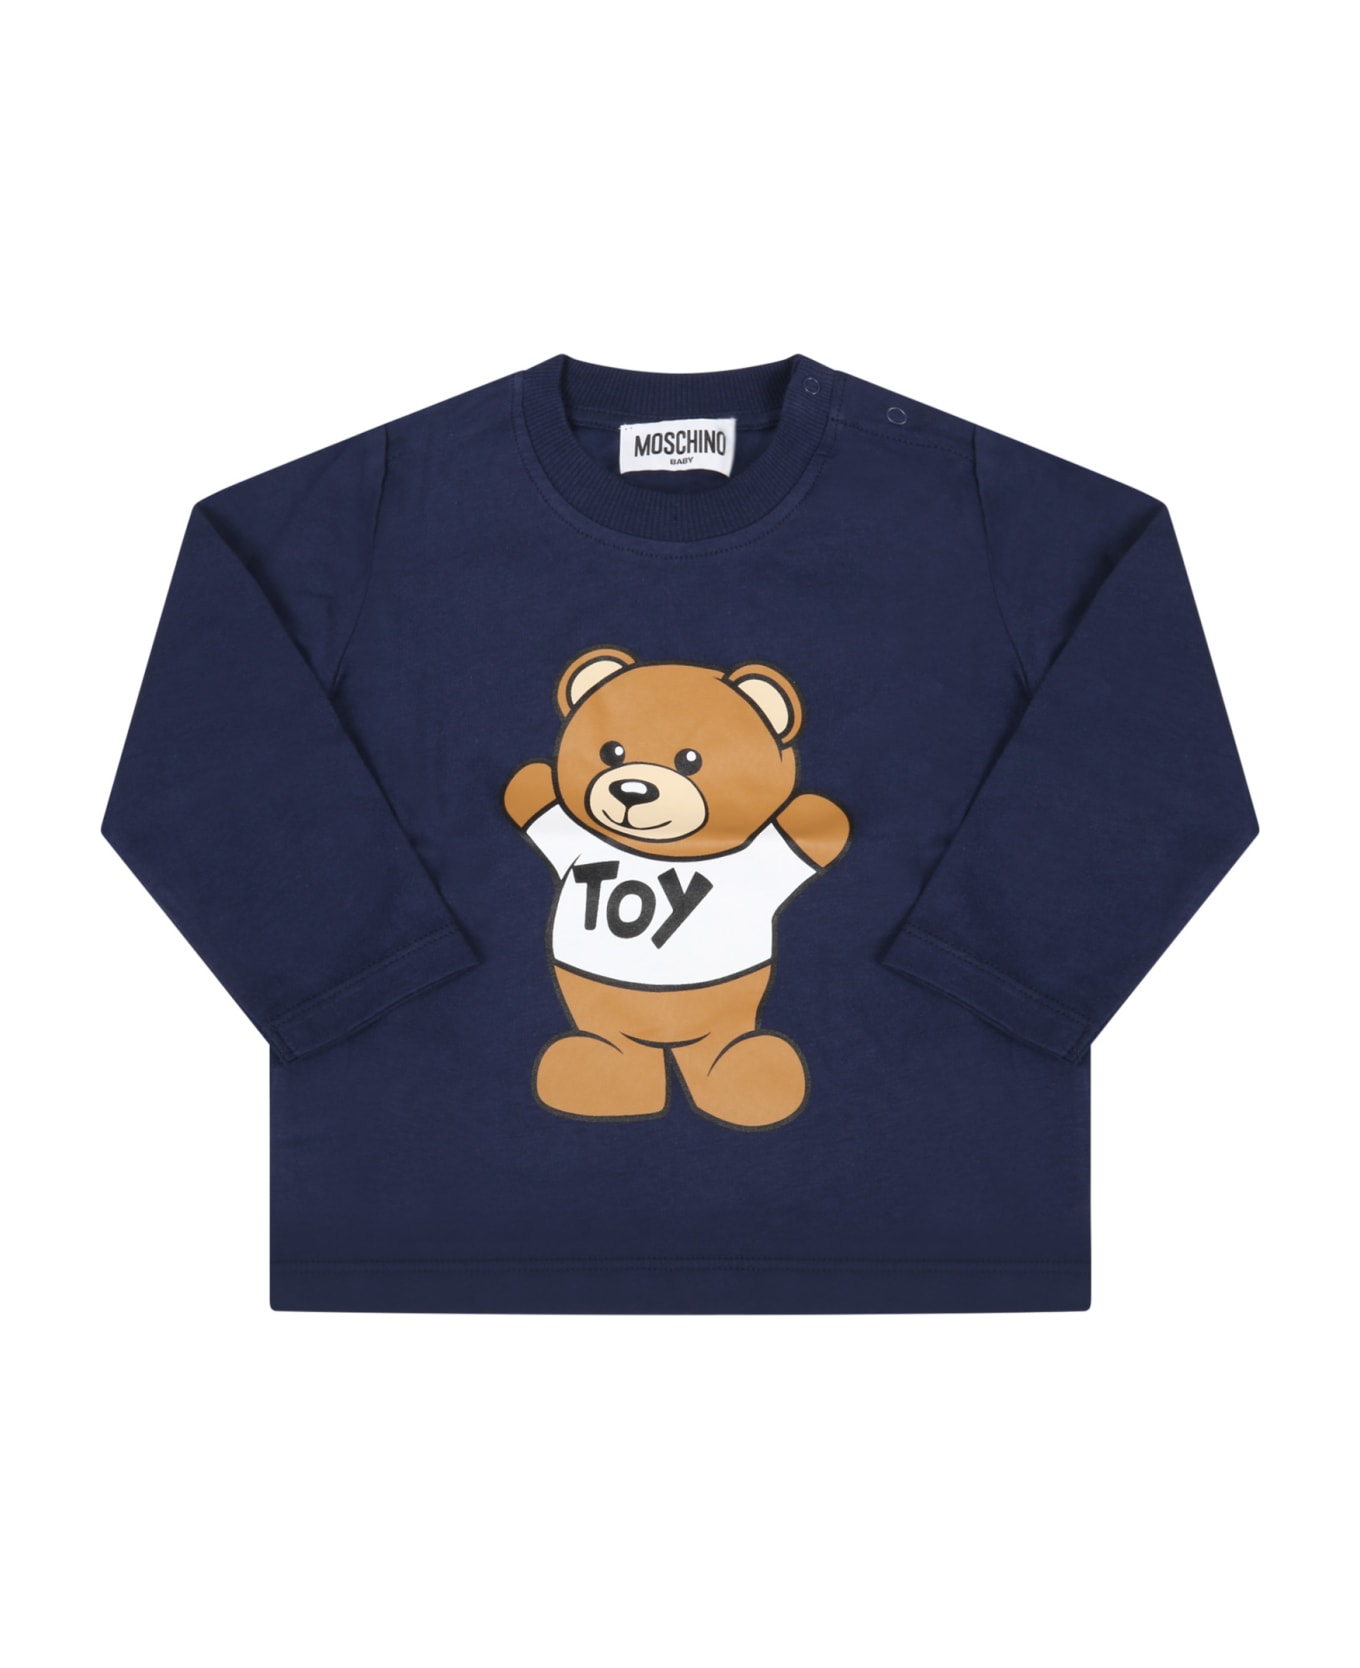 Moschino Blue T-shirt For Baby Kids With Teddy Bear - Blue